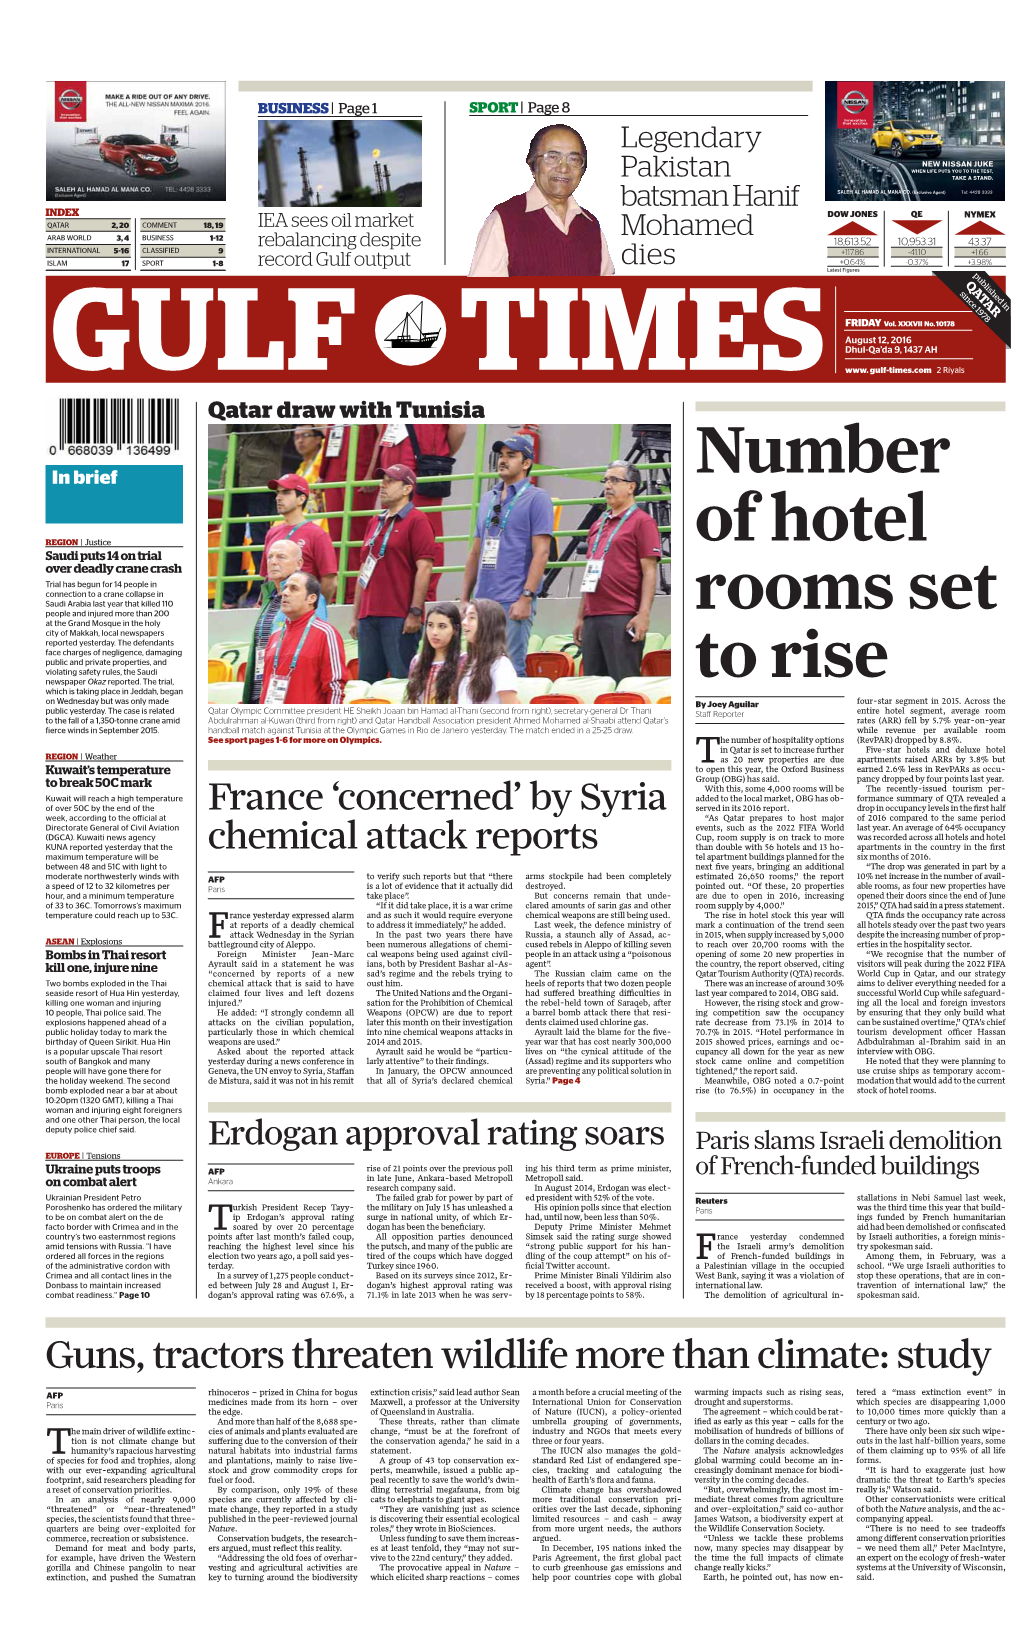 Number of Hotel Rooms Set to Rise